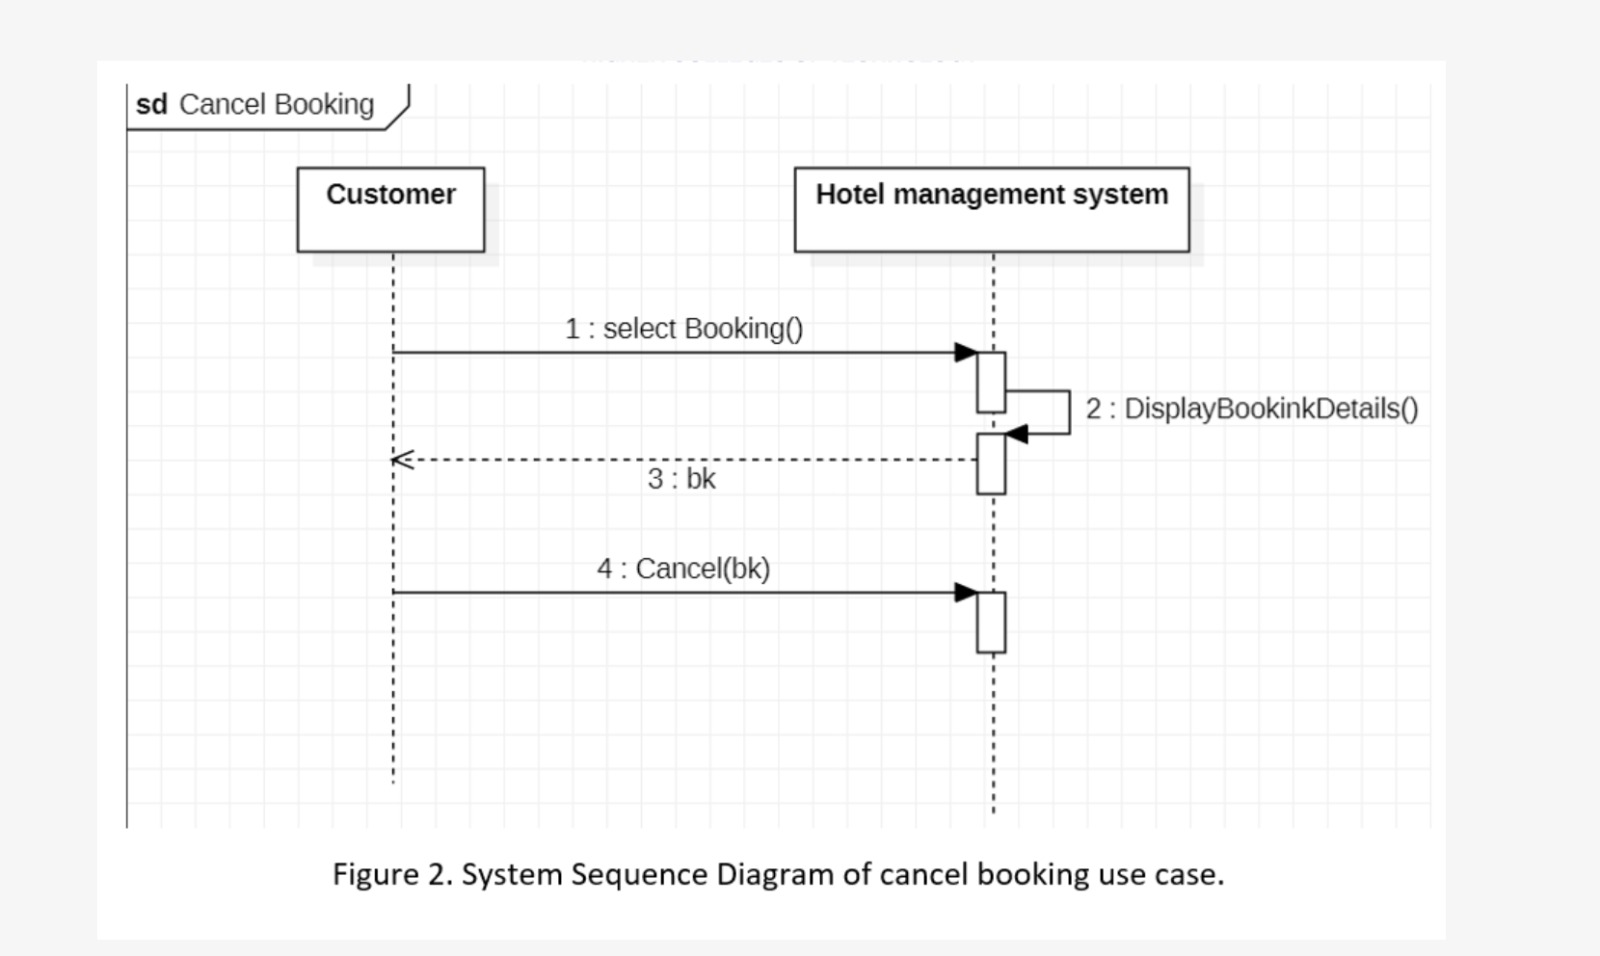 sd Cancel Booking Customer 1: select Booking() 3: bk 4: Cancel(bk) Hotel management system 2: